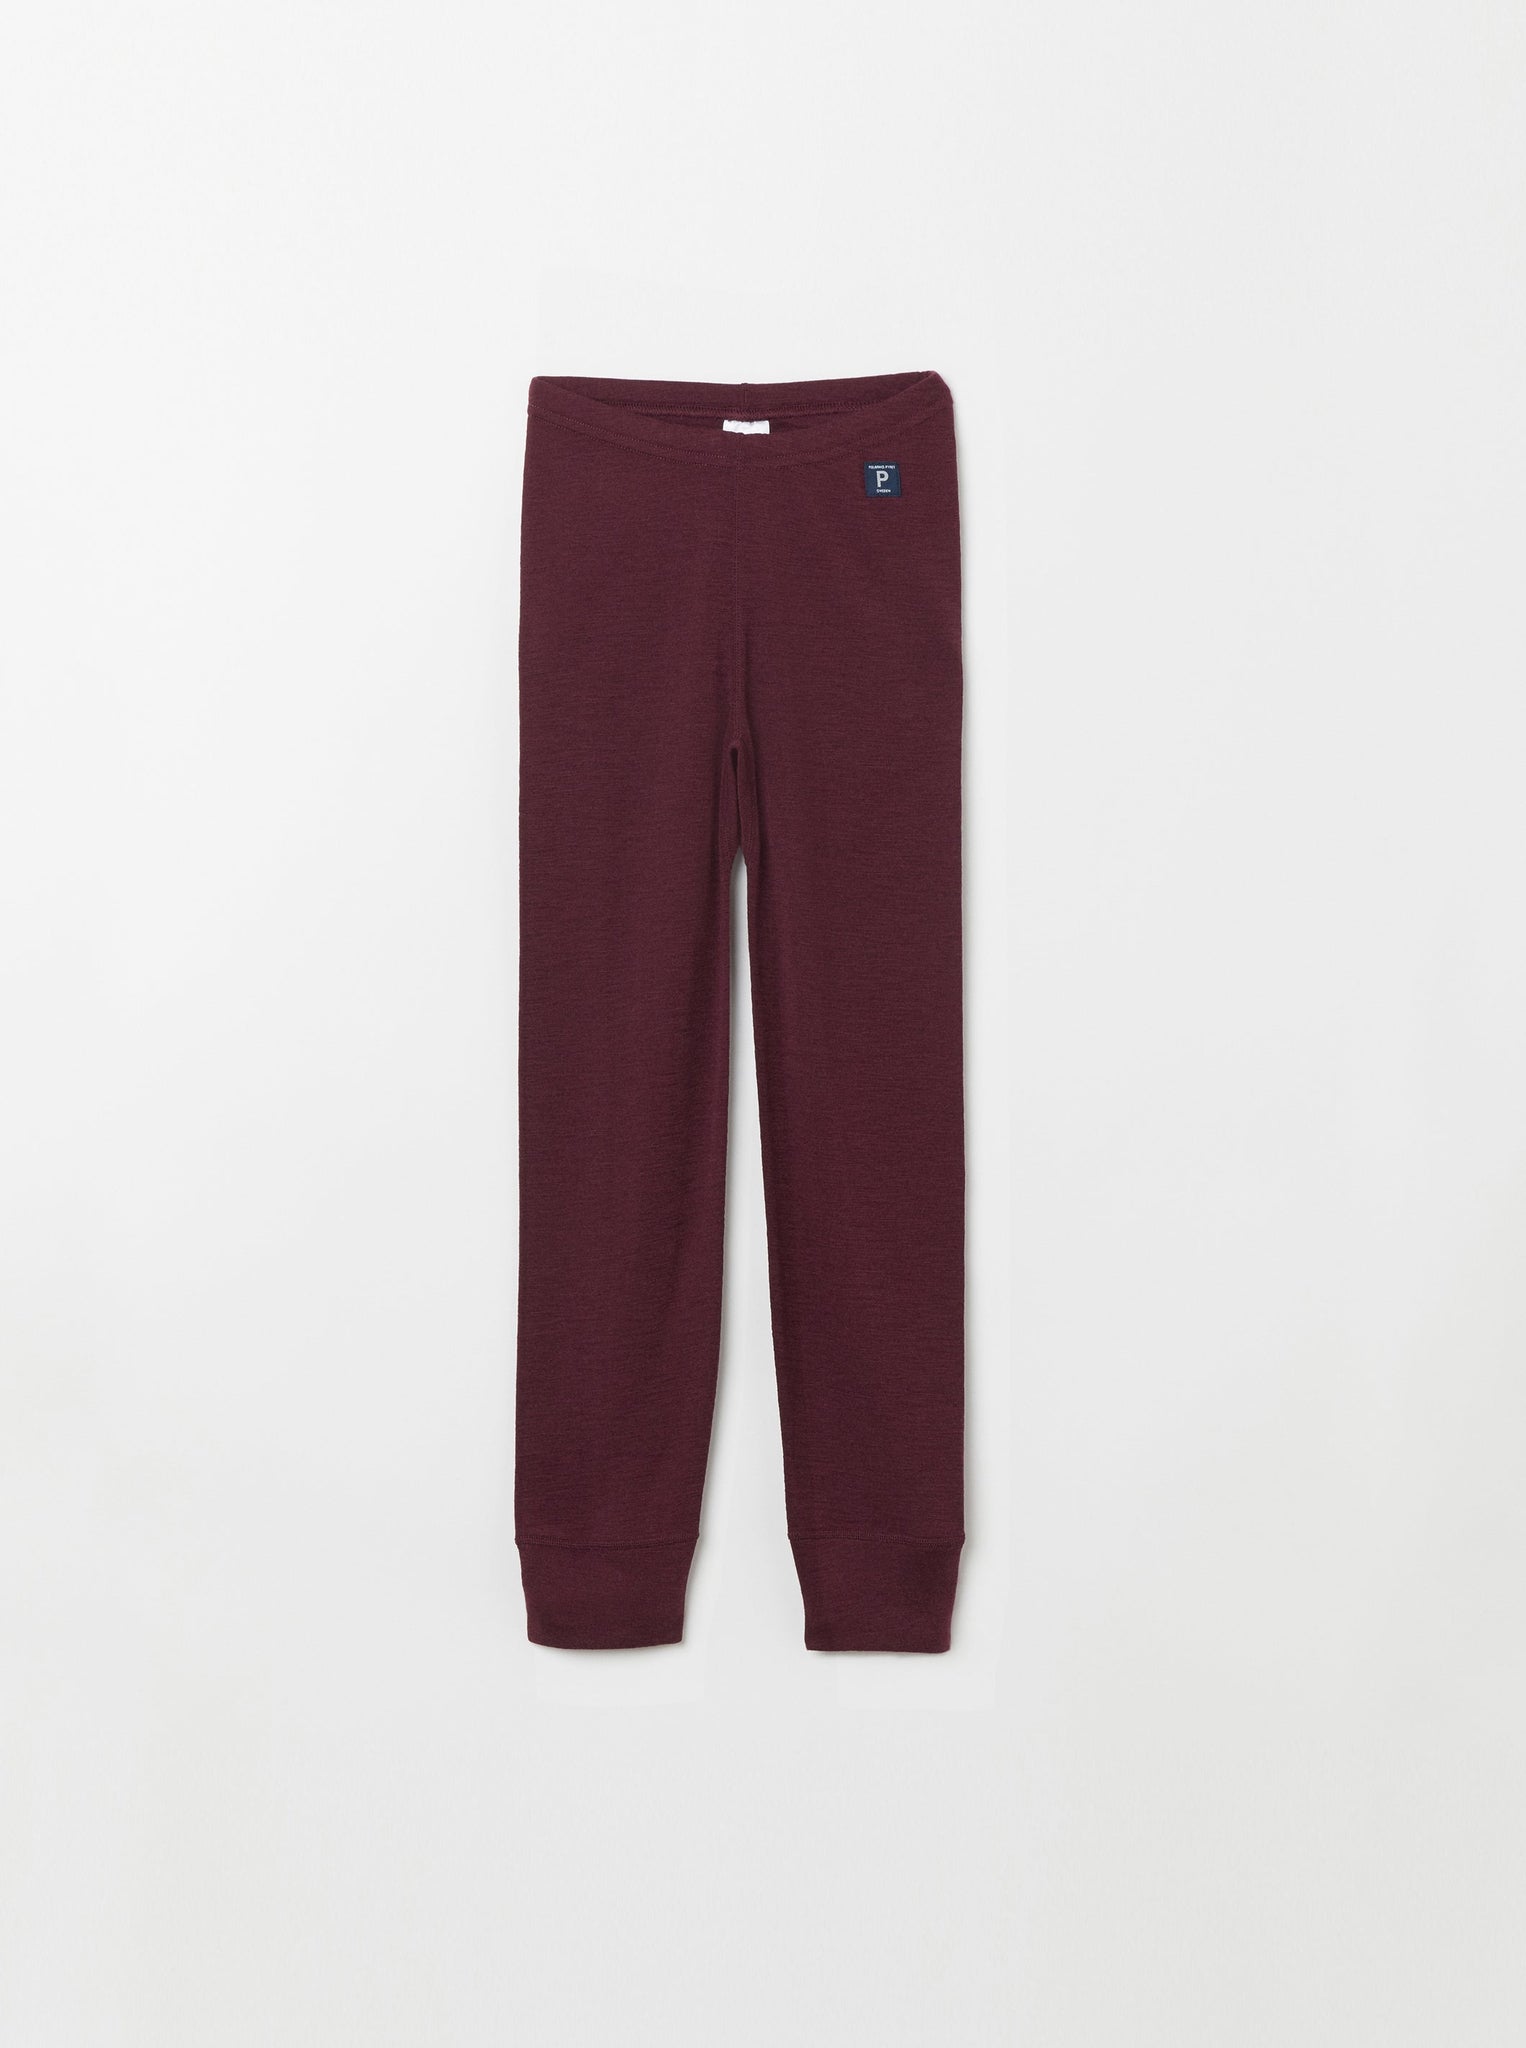 Merino Wool Thermal Kids Long Johns from the Polarn O. Pyret kidswear collection. Sustainably produced kids outerwear.